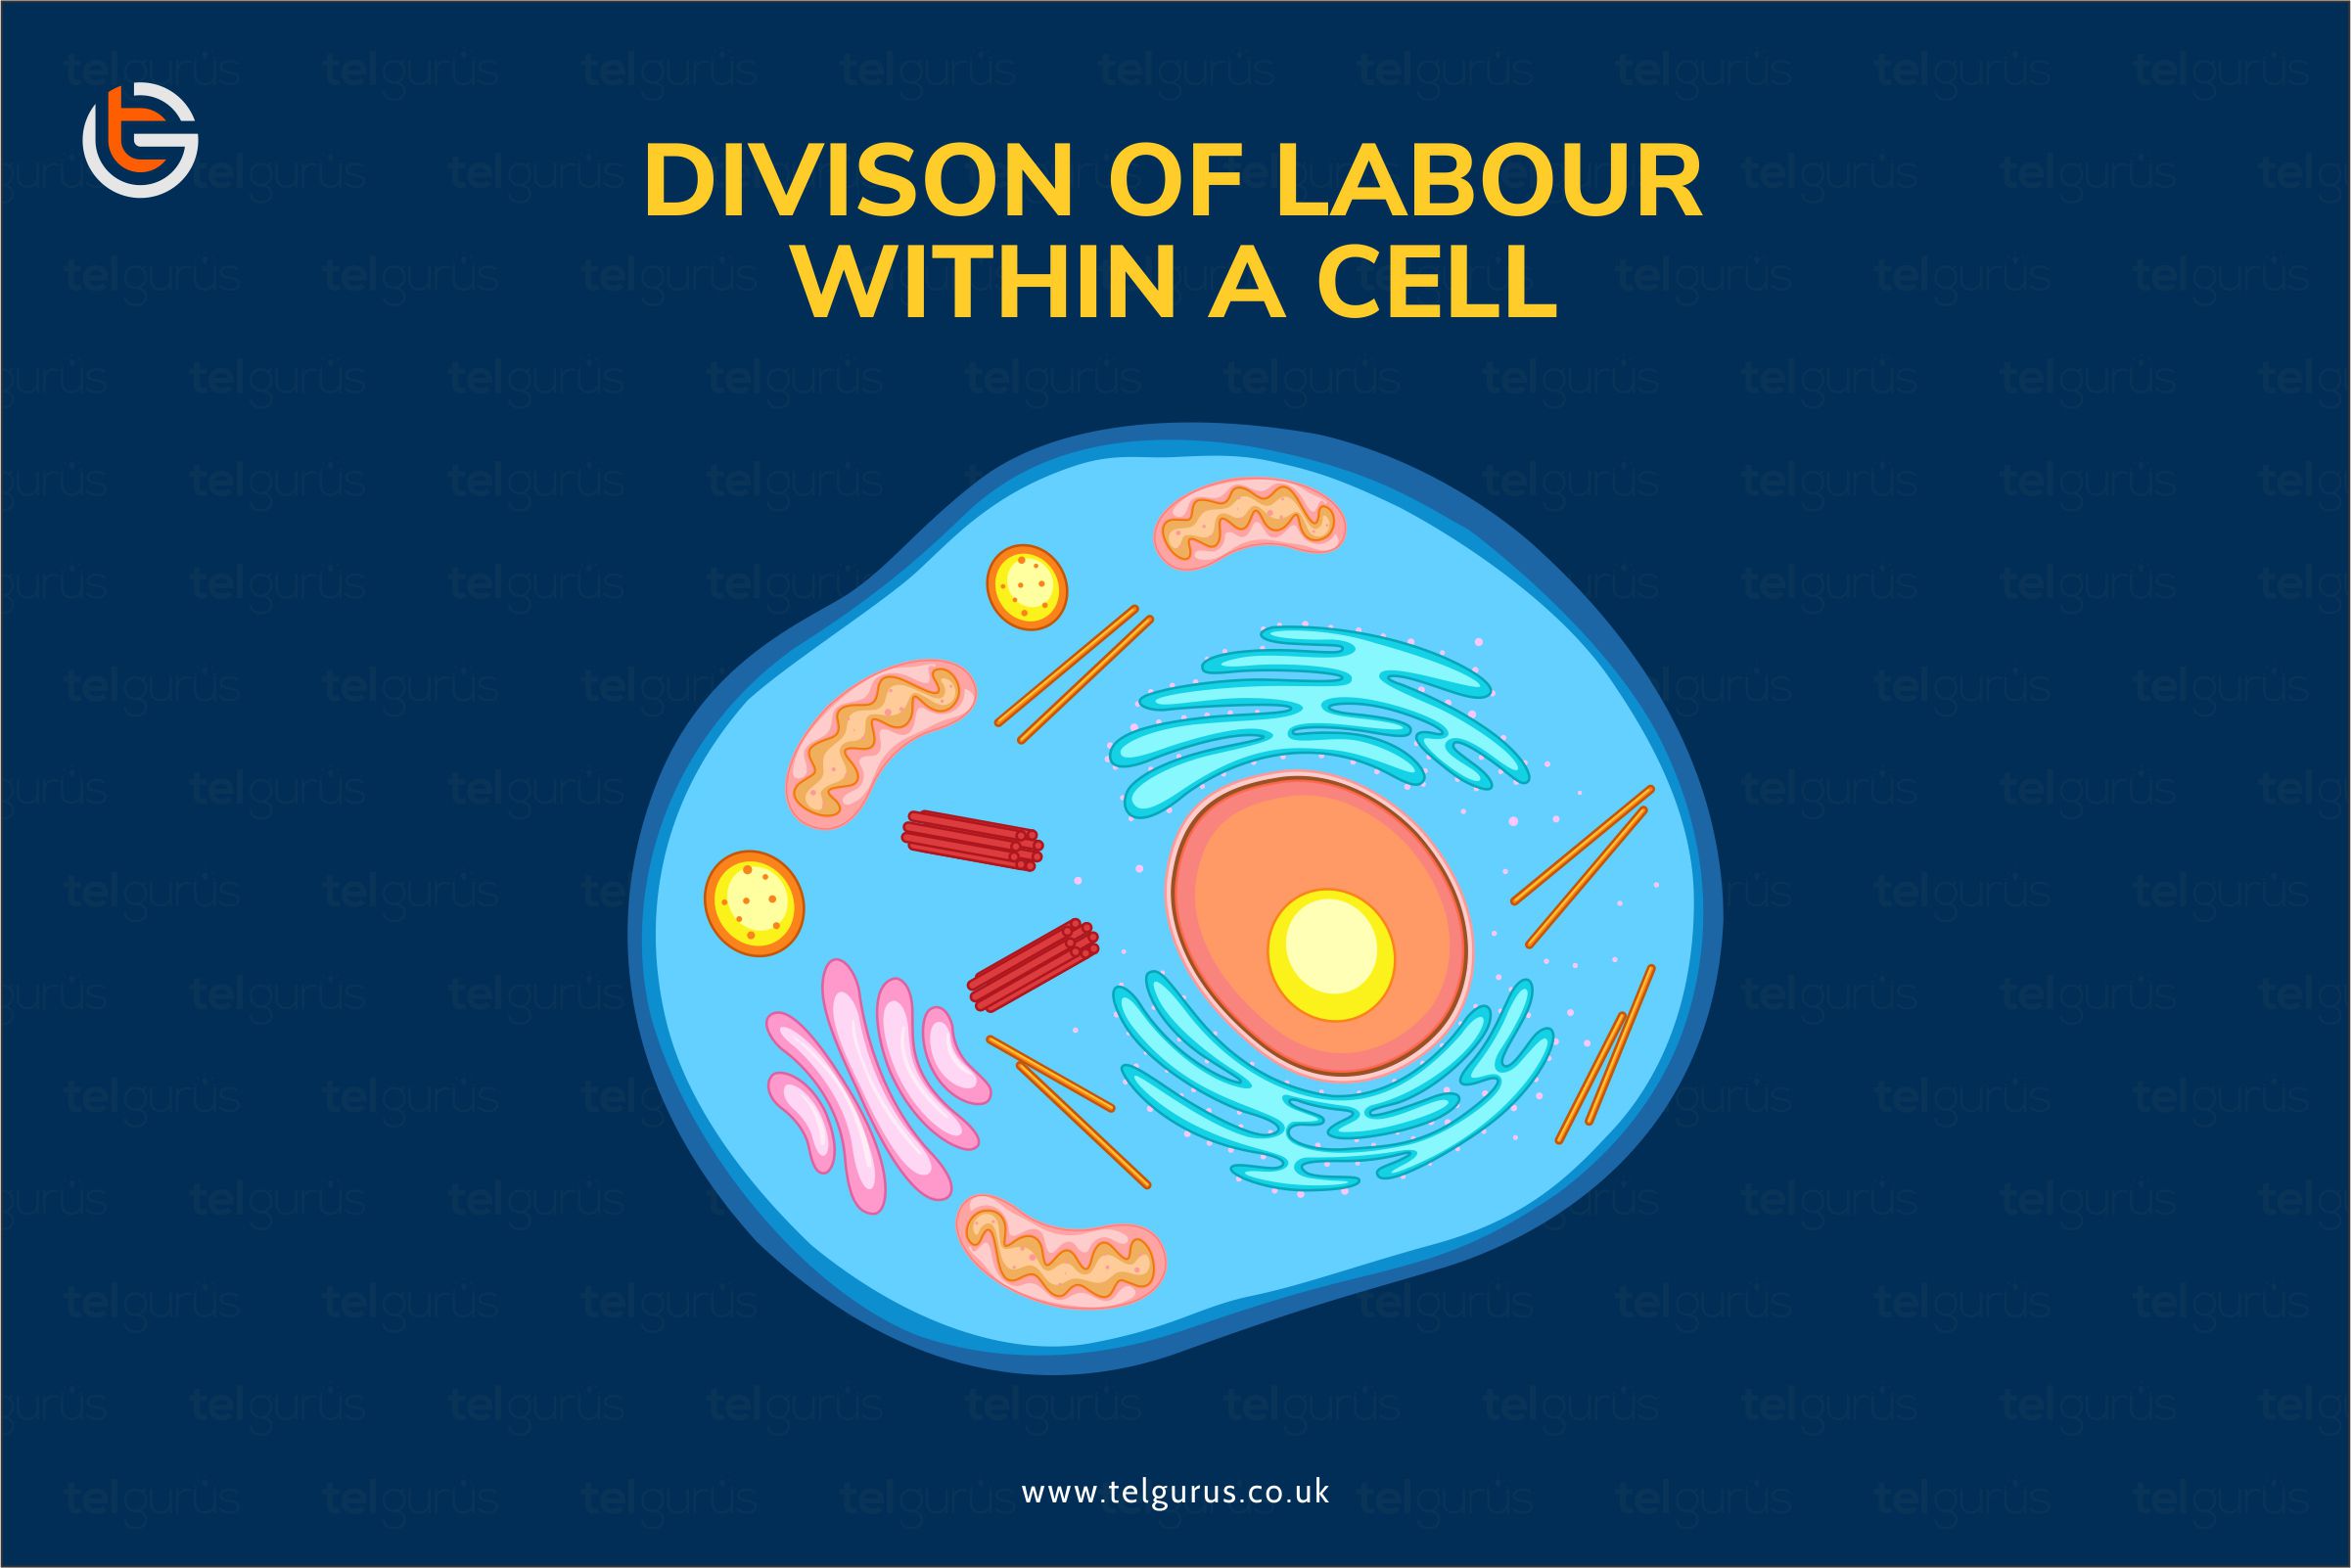 What is the division of labour within a cell?